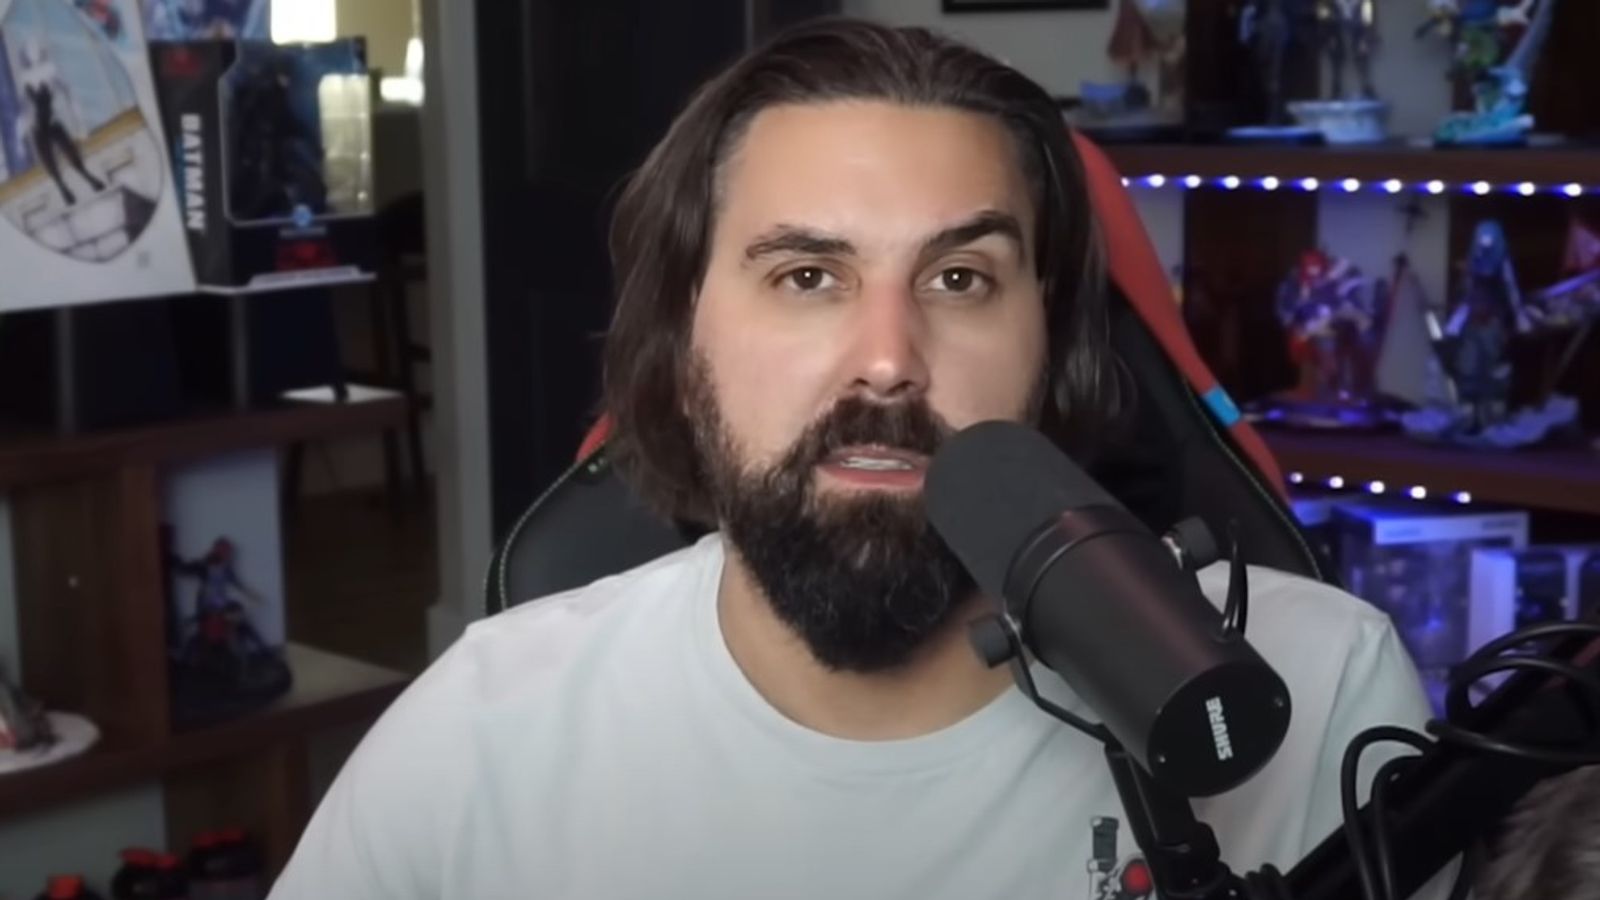 Comicstorian: YouTube star dies aged 40 after 'unfortunate accident'